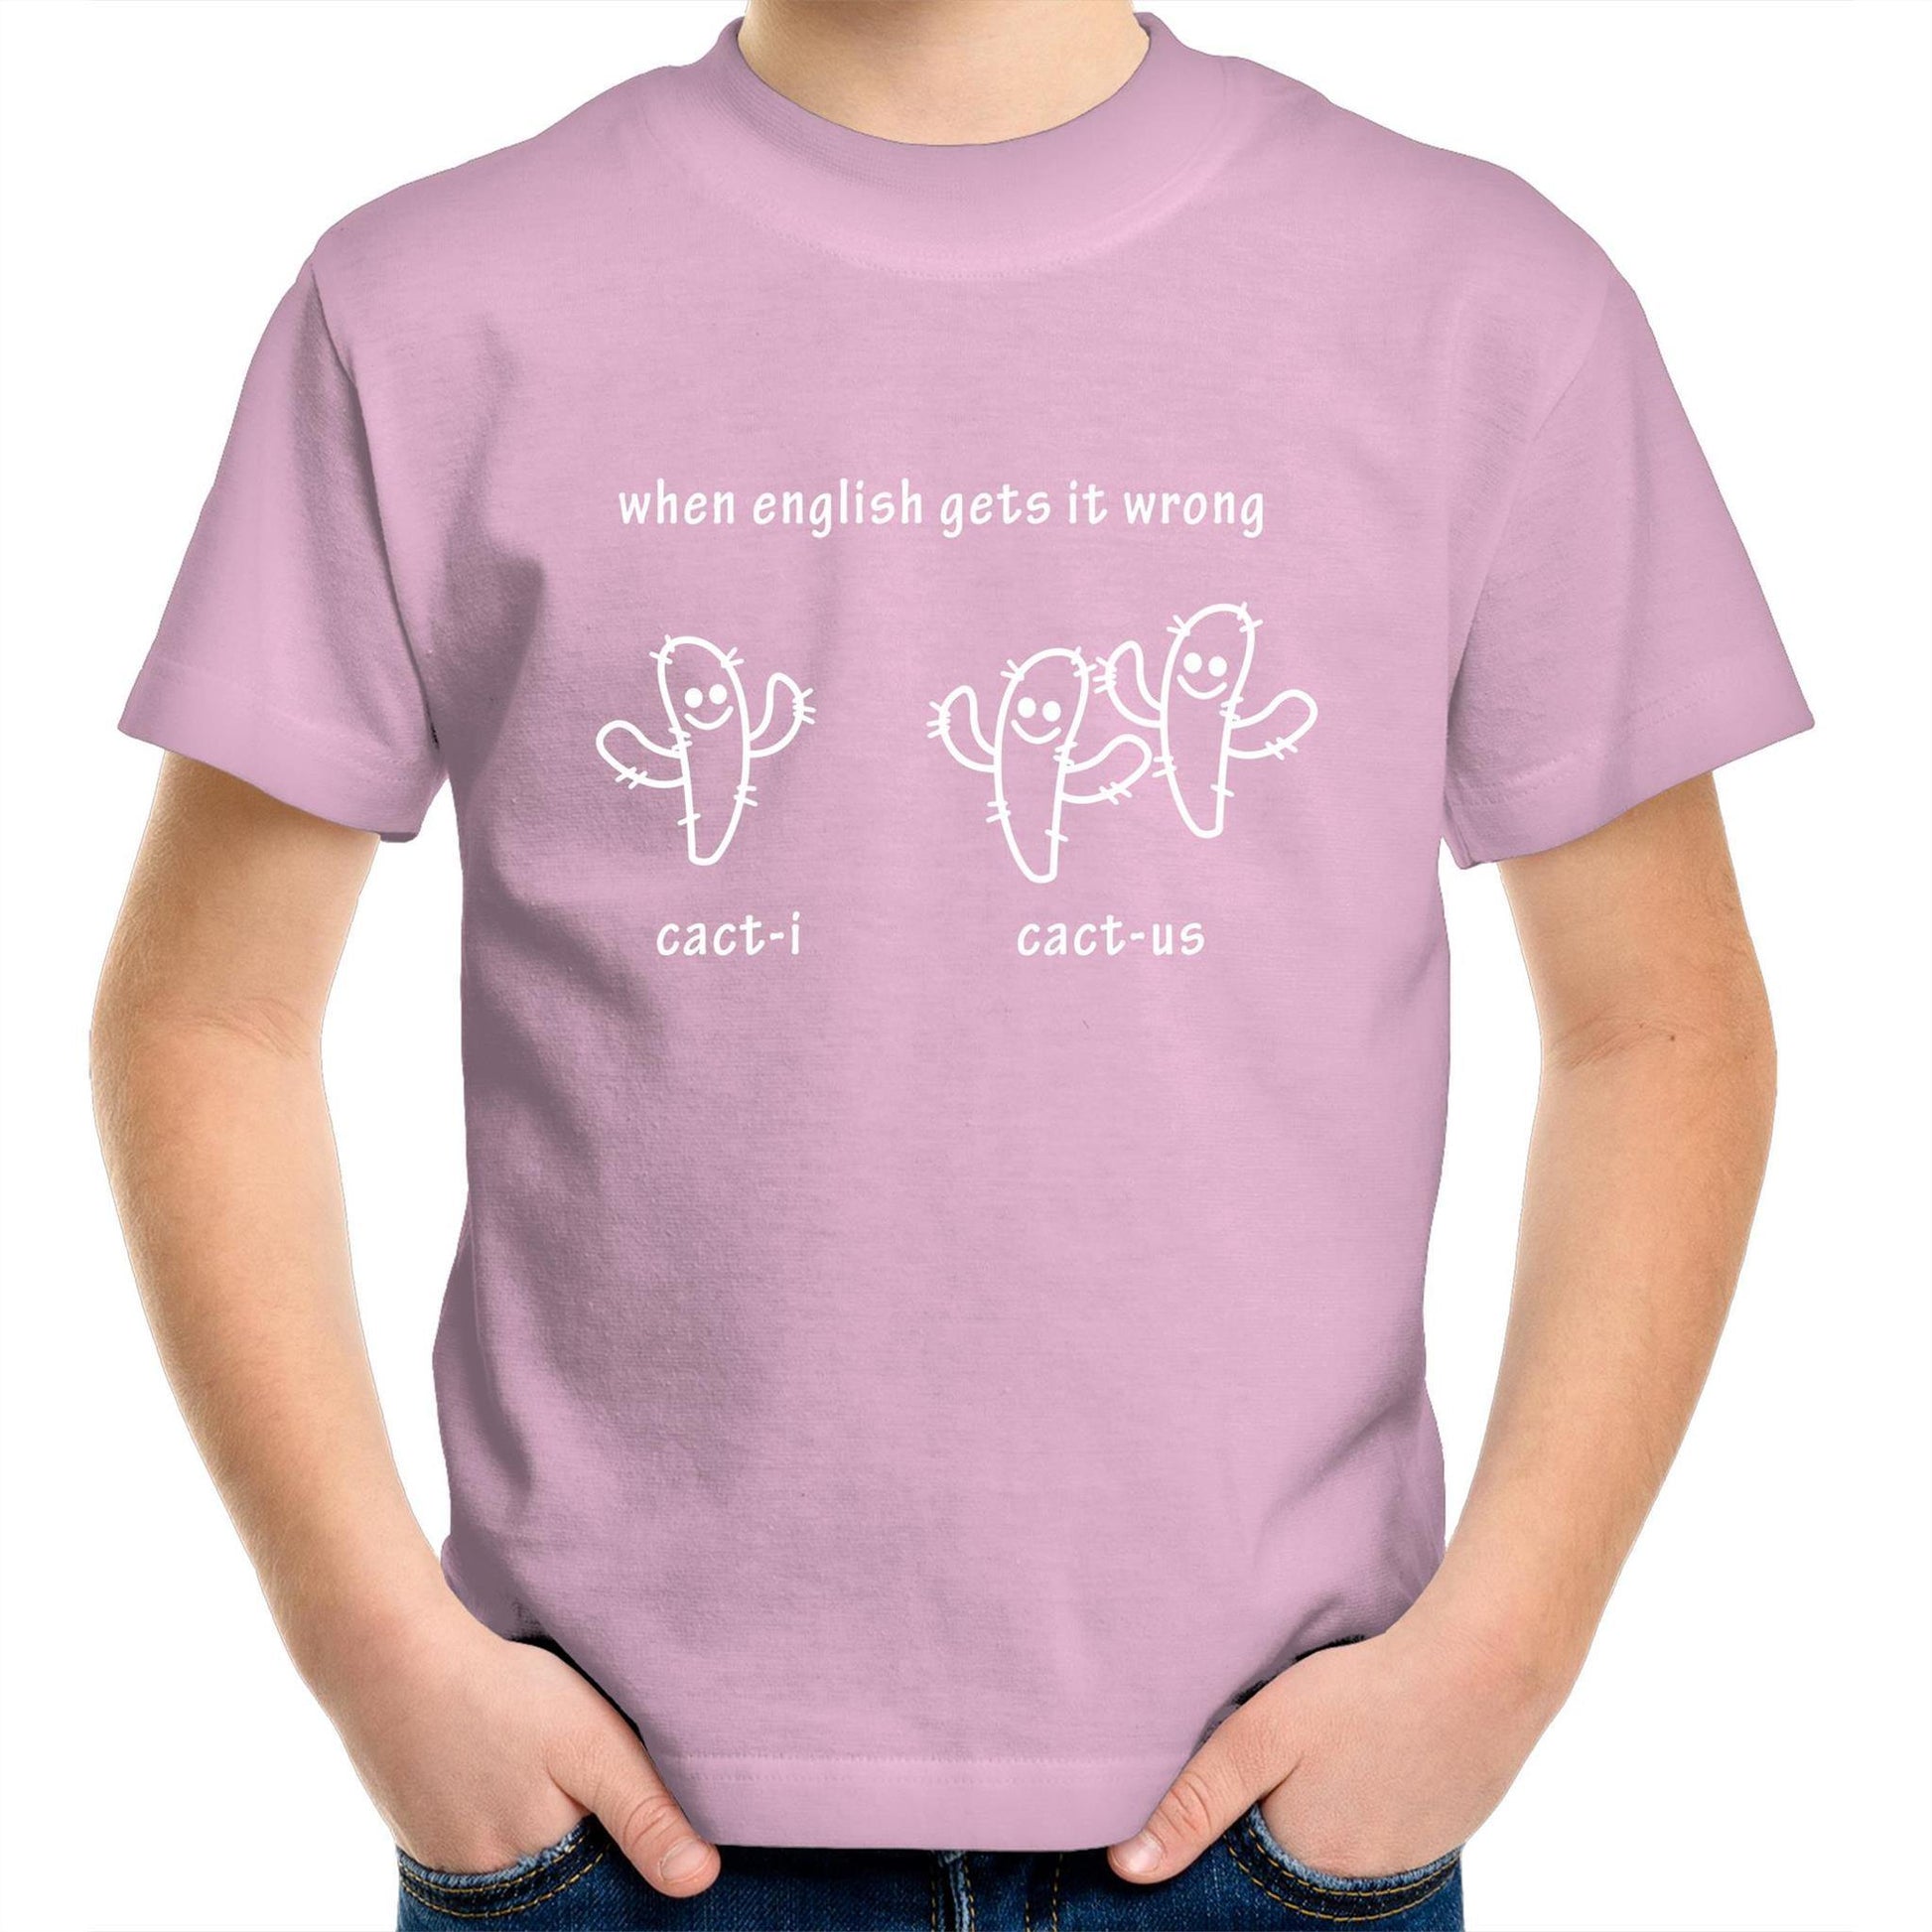 Cacti Cactus - Kids Youth Crew T-Shirt Pink Kids Youth T-shirt Funny Plants